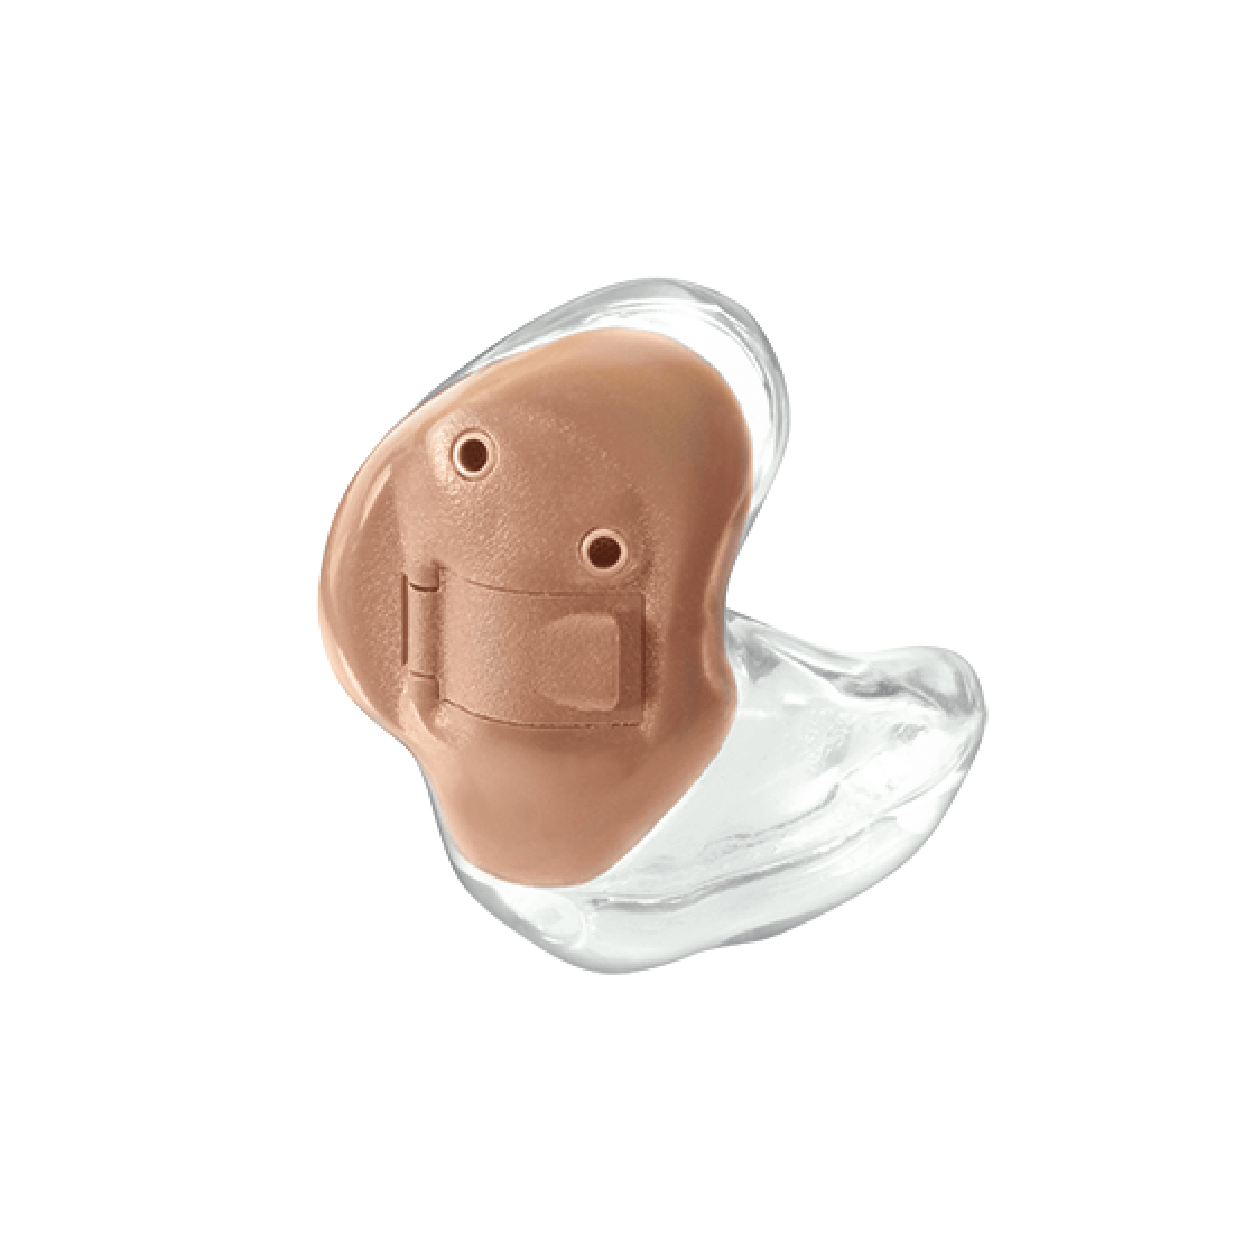 ITE style hearing aid